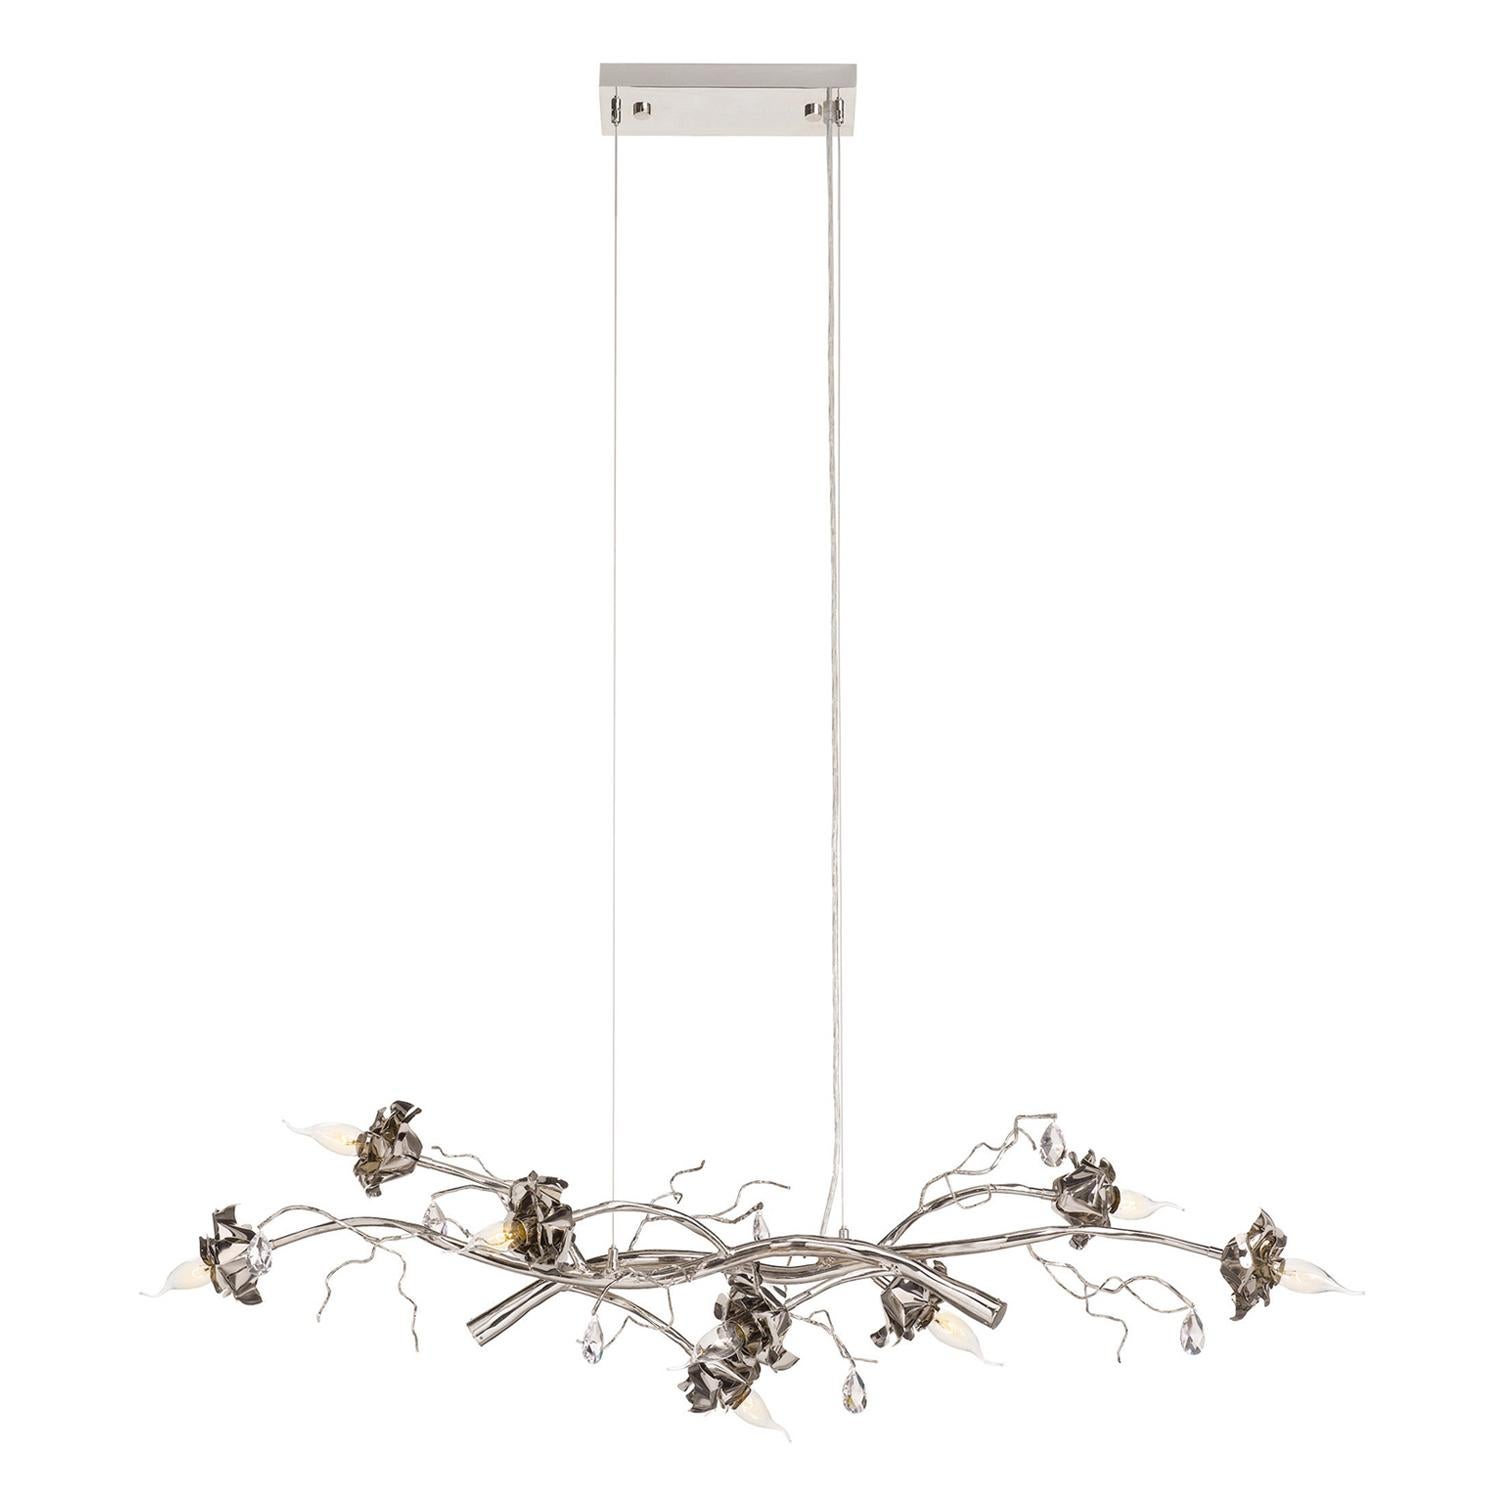 Modern Pendant in a Nickel Finish, La Vie En Rose Collection, by Brand Van  For Sale